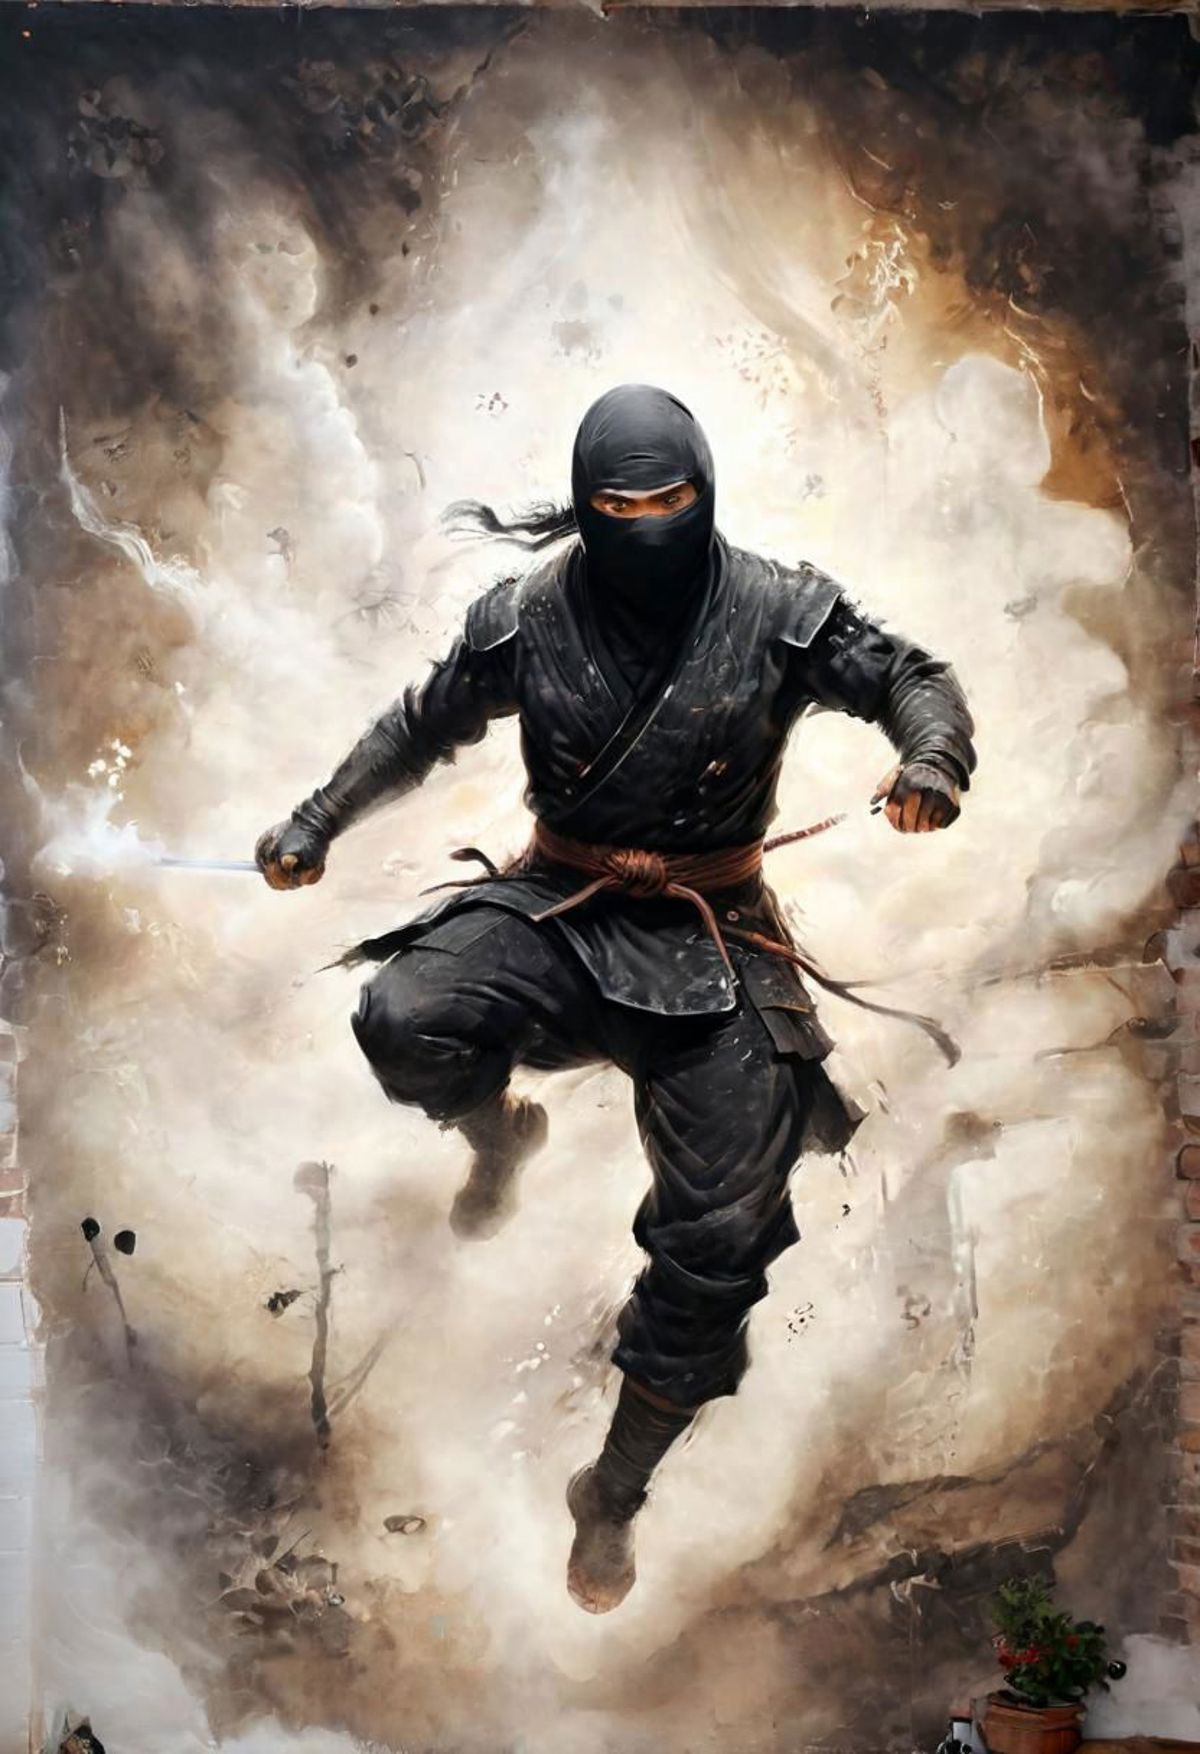 A ninja with a sword in a dynamic pose.